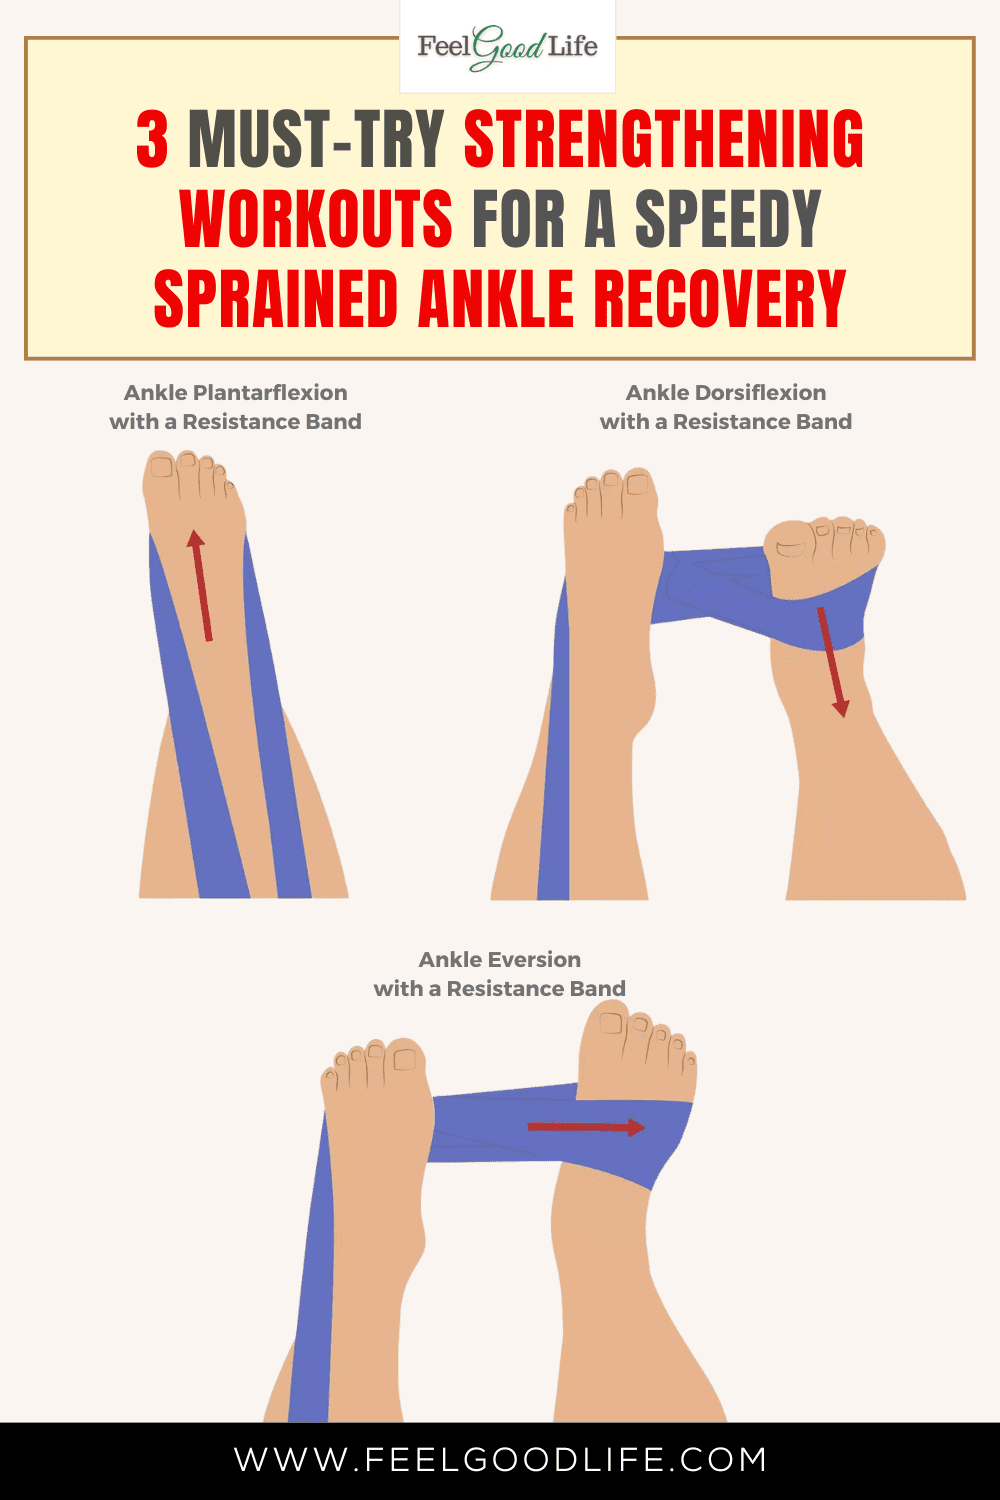 3 Must-Try Strengthening Workouts for a Speedy Sprained Ankle Recovery